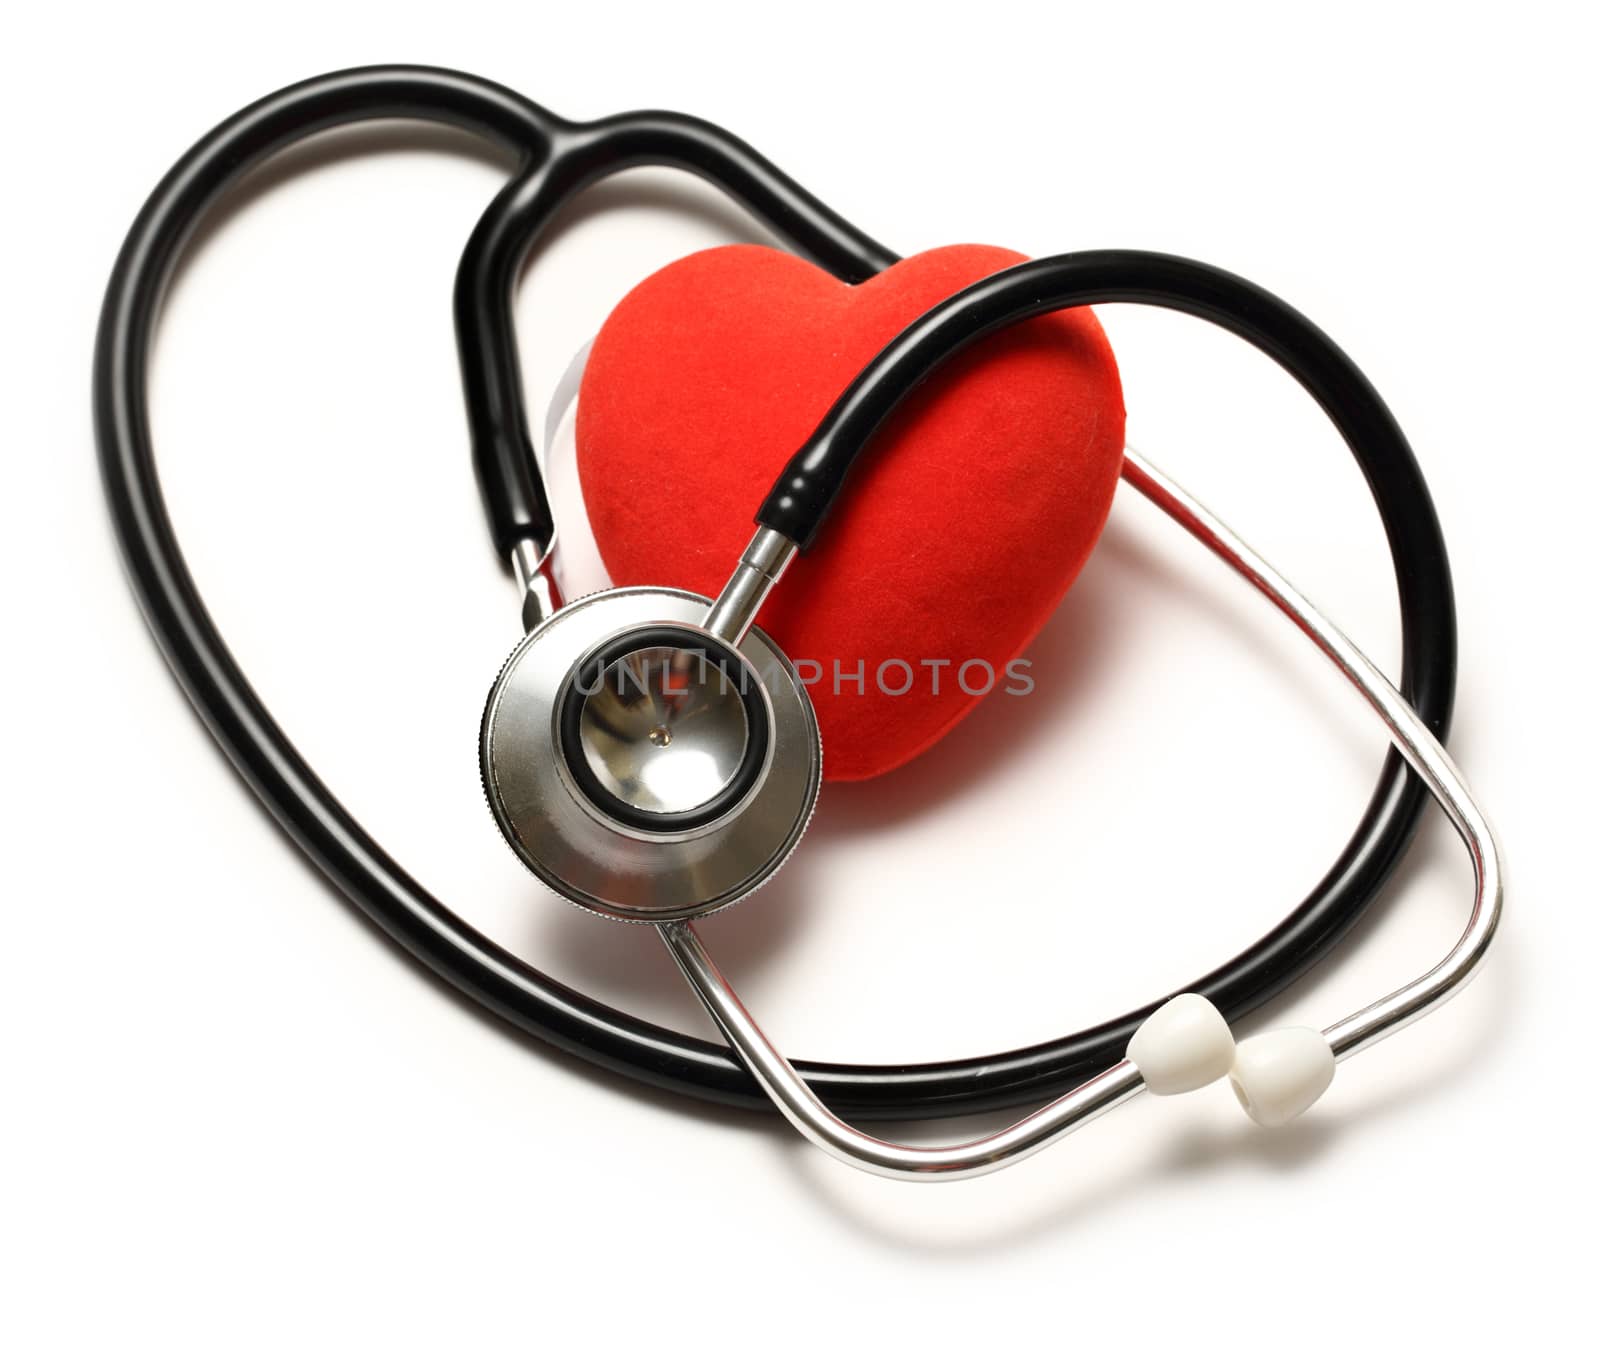 Stethoscope and red heart on white